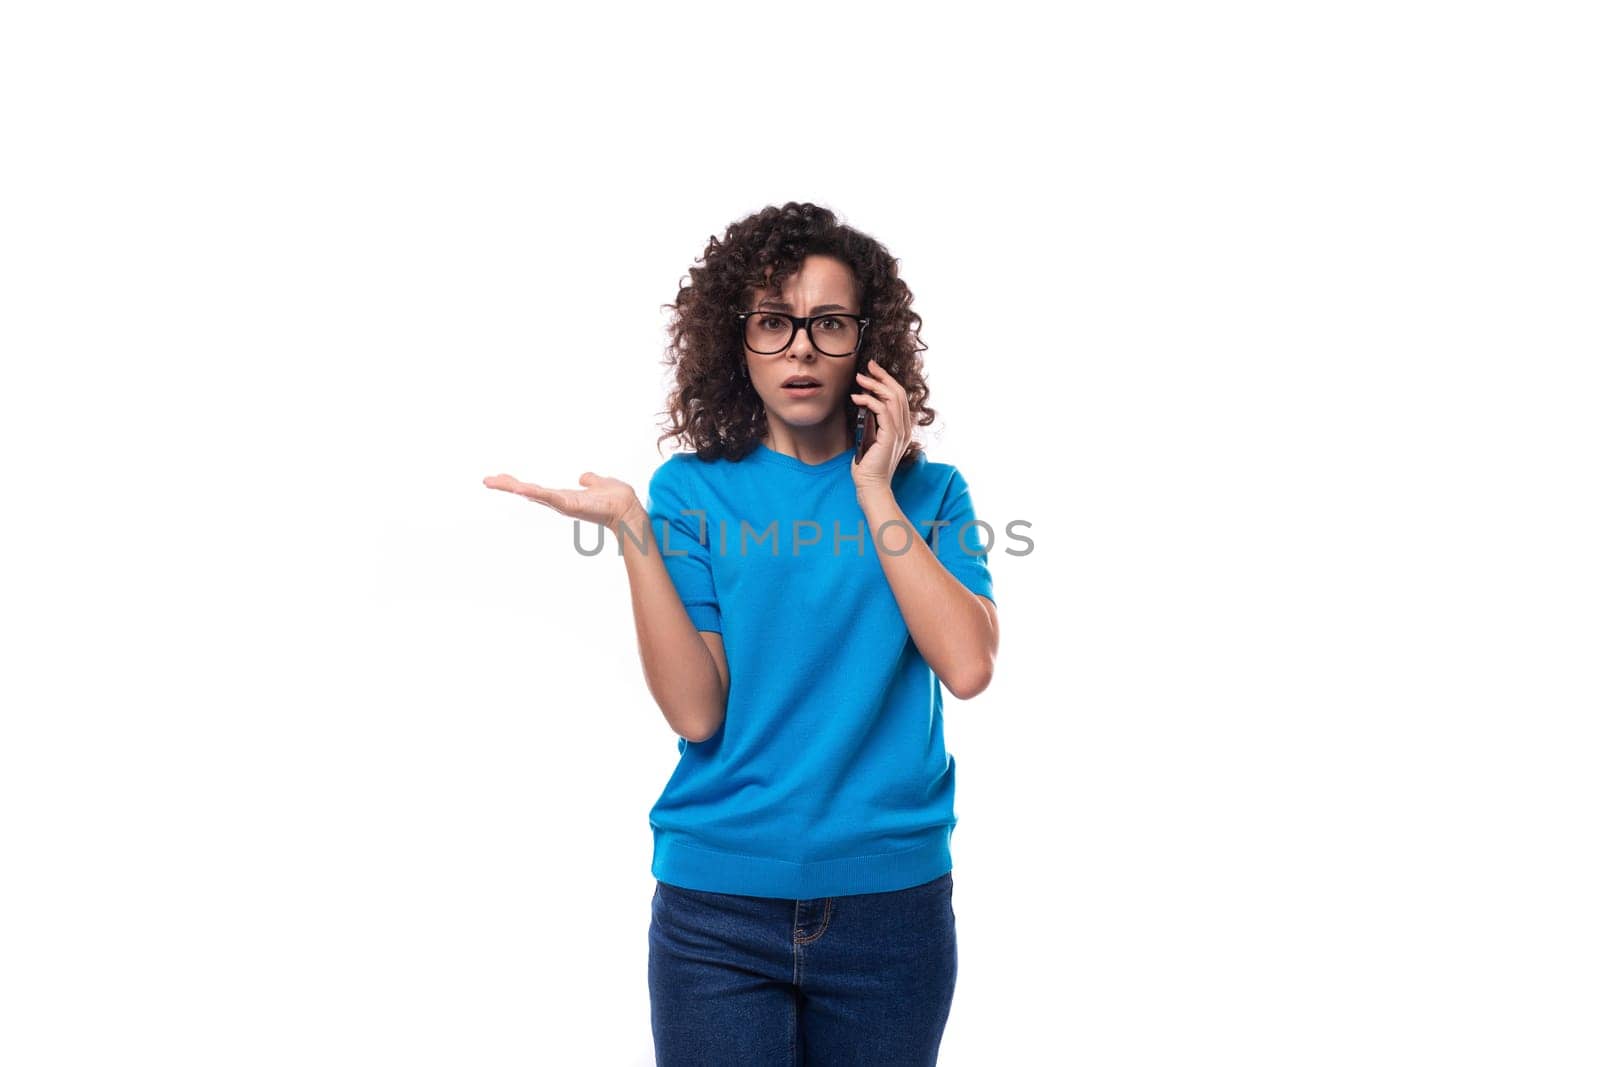 young strict leader woman with curly hair dressed in a blue t-shirt speaks on the phone by TRMK